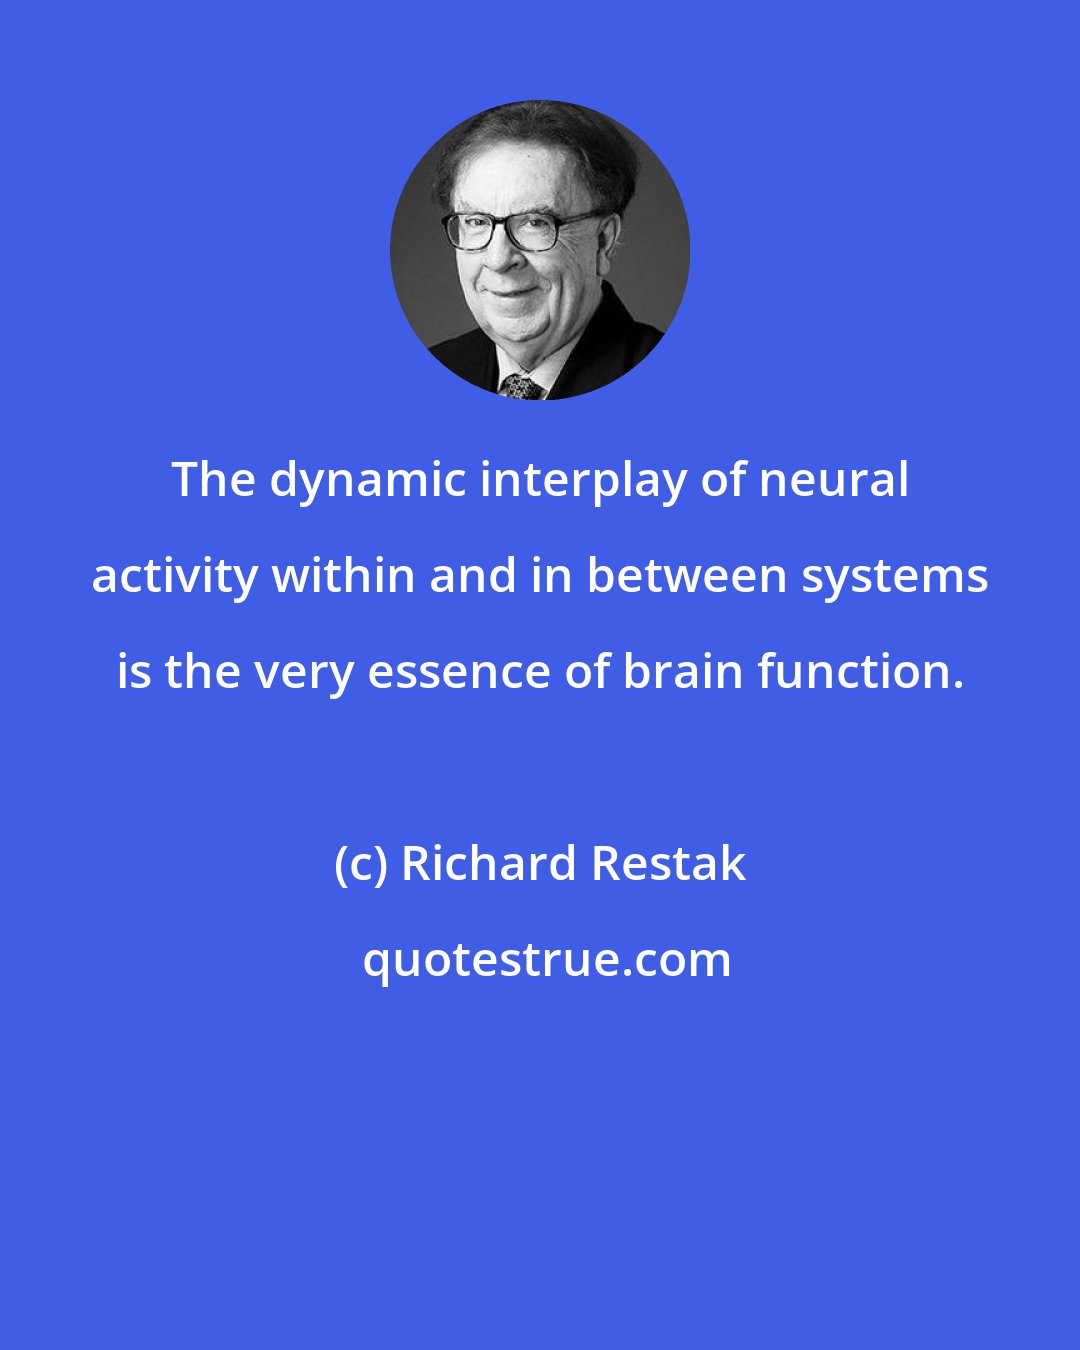 Richard Restak: The dynamic interplay of neural activity within and in between systems is the very essence of brain function.